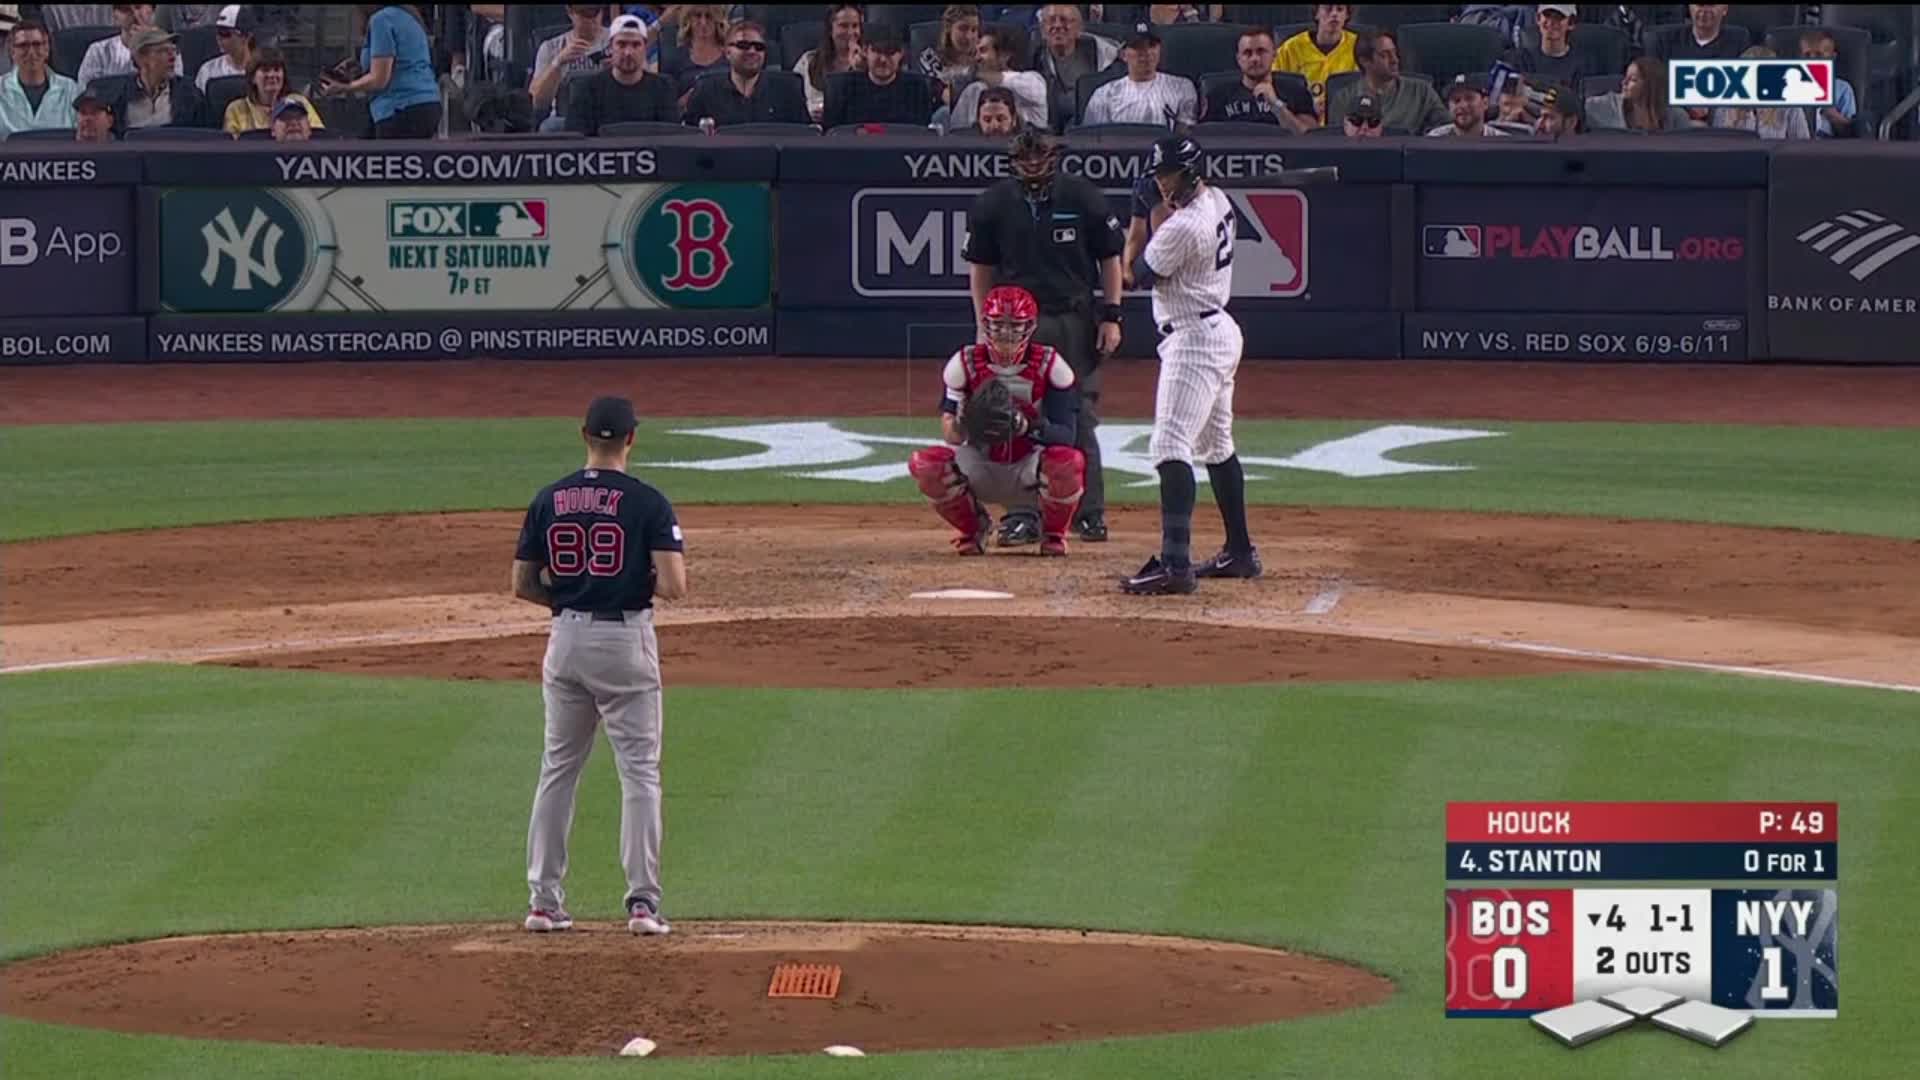 Highlight] Tanner Houck hits Giancarlo Stanton with a fastball and